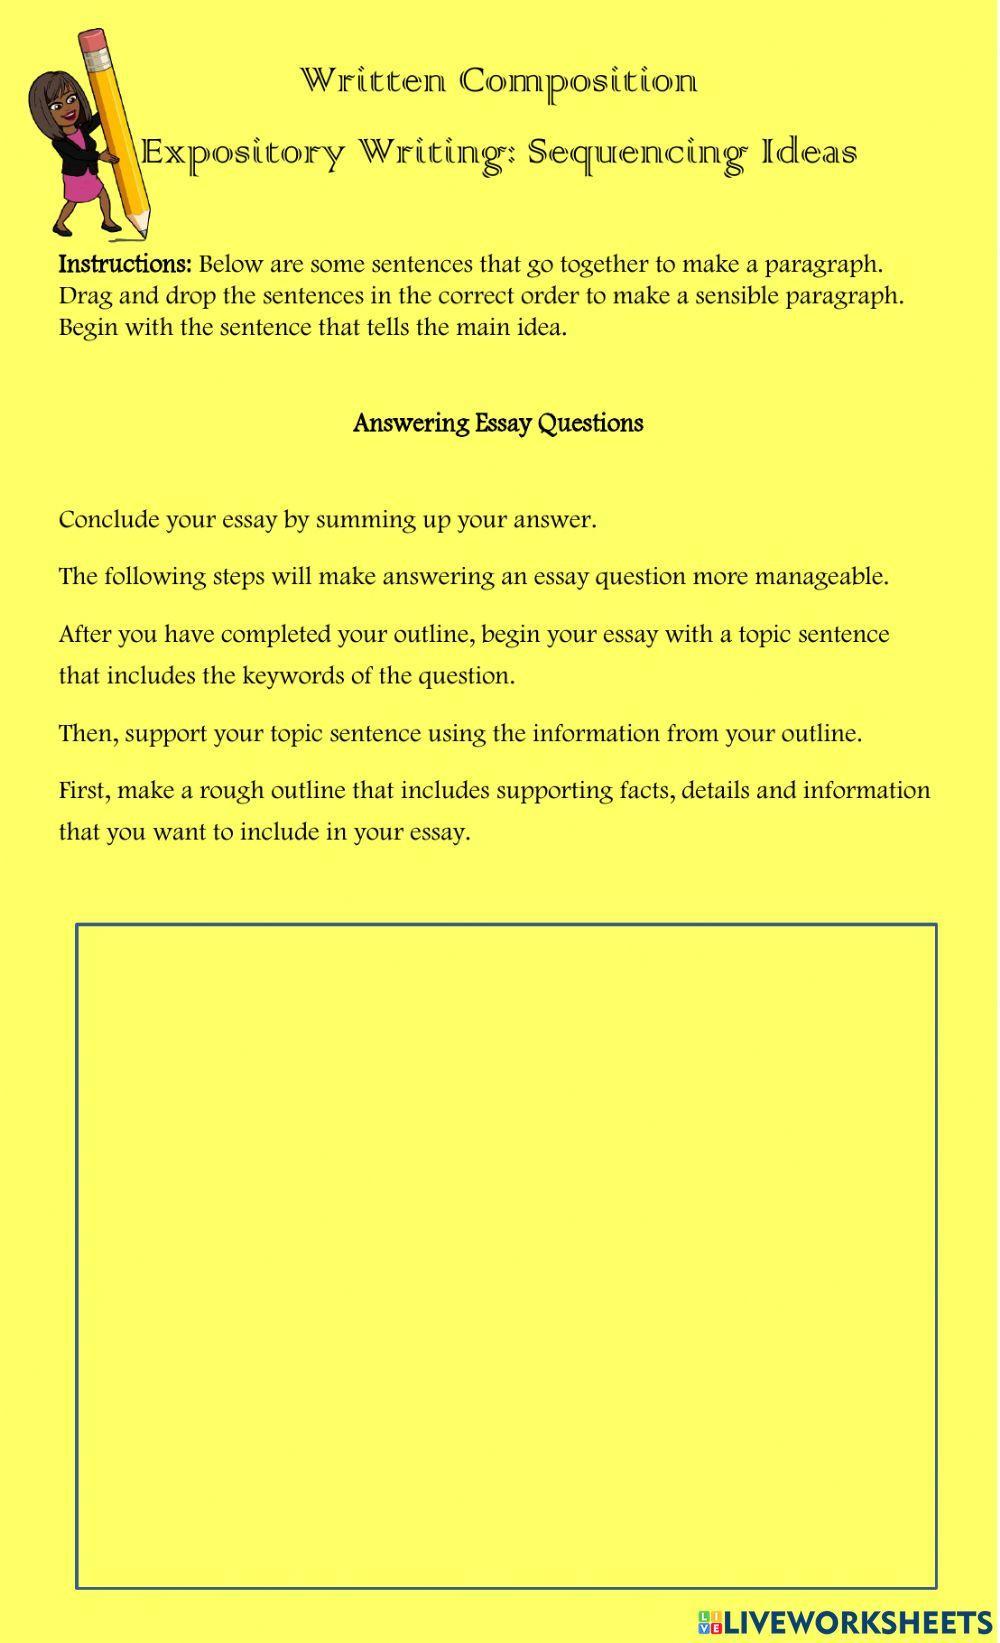 Expository Writing: Sequencing Ideas